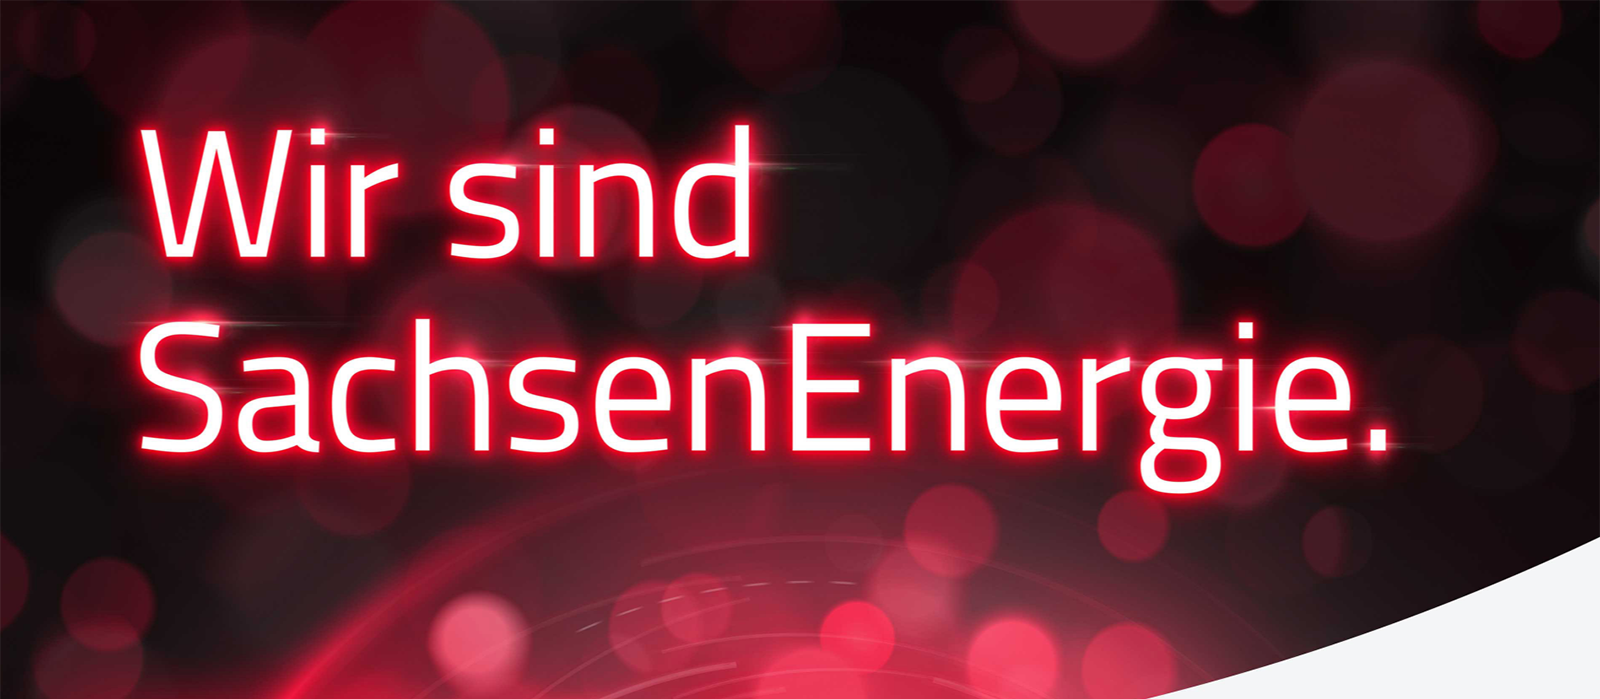 SachsenEnergie, the largest municipal energy utility in eastern Germany, bills one million contracts via powercloud in future